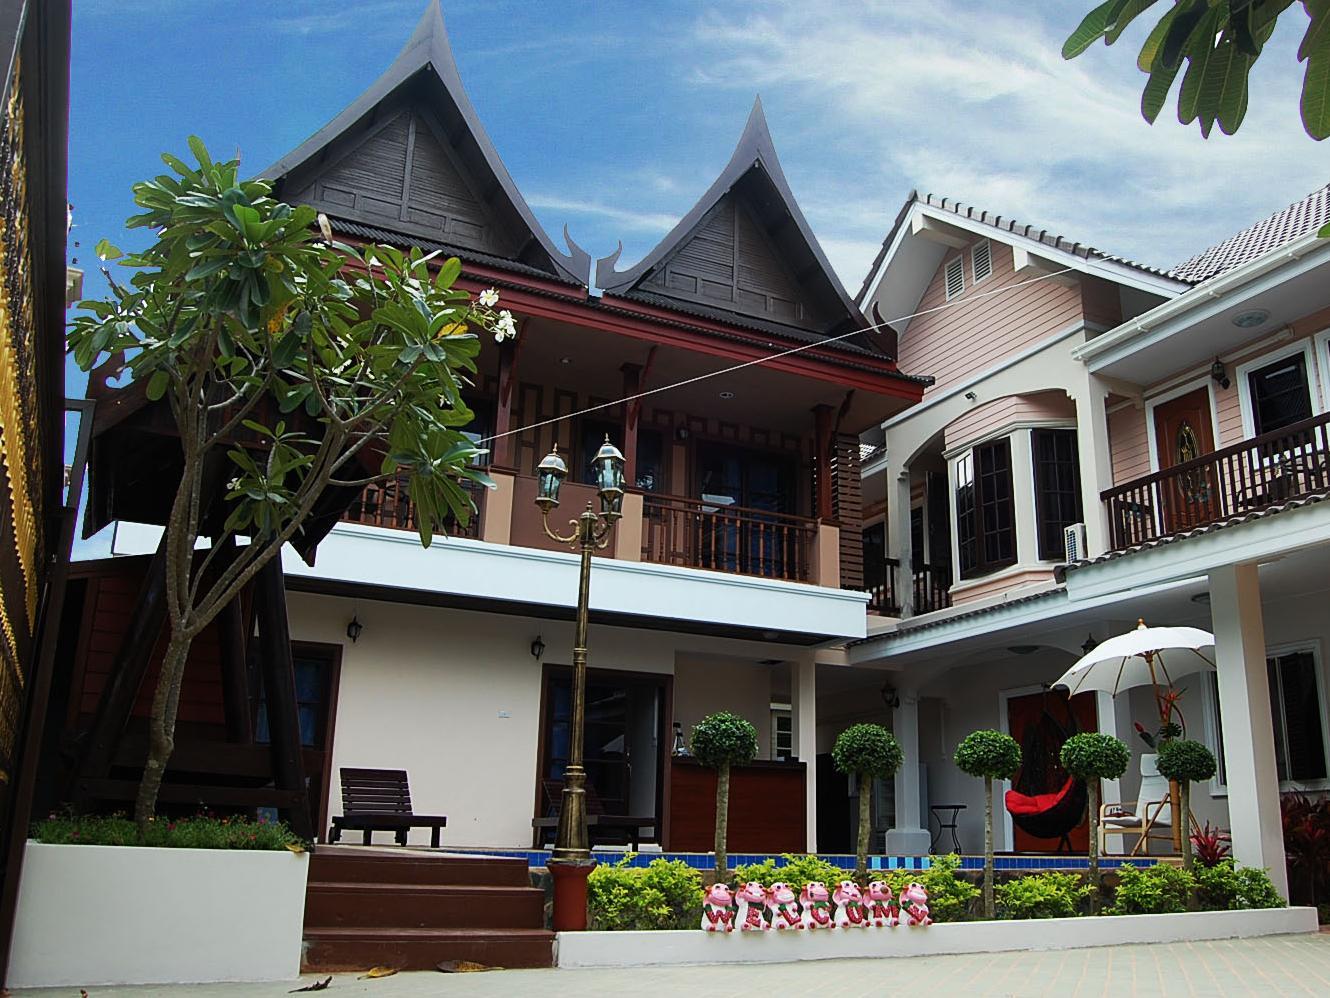 Nasuk House Cha-Am Thailand FAQ 2016, What facilities are there in Nasuk House Cha-Am Thailand 2016, What Languages Spoken are Supported in Nasuk House Cha-Am Thailand 2016, Which payment cards are accepted in Nasuk House Cha-Am Thailand , Thailand Nasuk House Cha-Am room facilities and services Q&A 2016, Thailand Nasuk House Cha-Am online booking services 2016, Thailand Nasuk House Cha-Am address 2016, Thailand Nasuk House Cha-Am telephone number 2016,Thailand Nasuk House Cha-Am map 2016, Thailand Nasuk House Cha-Am traffic guide 2016, how to go Thailand Nasuk House Cha-Am, Thailand Nasuk House Cha-Am booking online 2016, Thailand Nasuk House Cha-Am room types 2016.